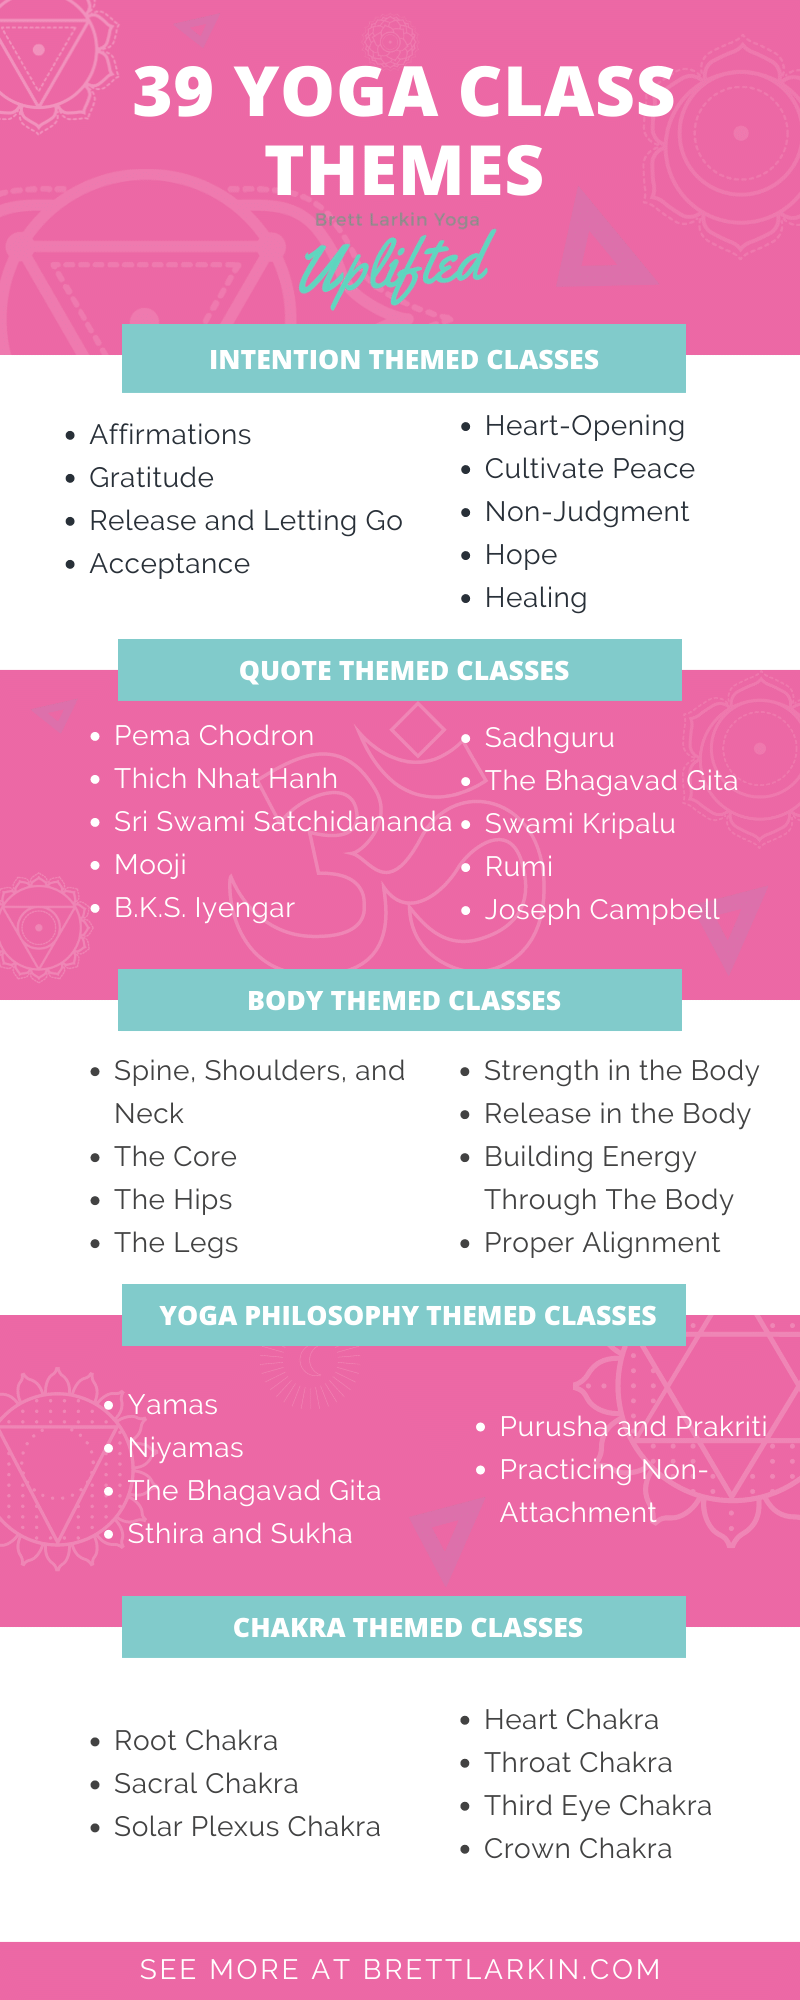 yoga class themes infographic